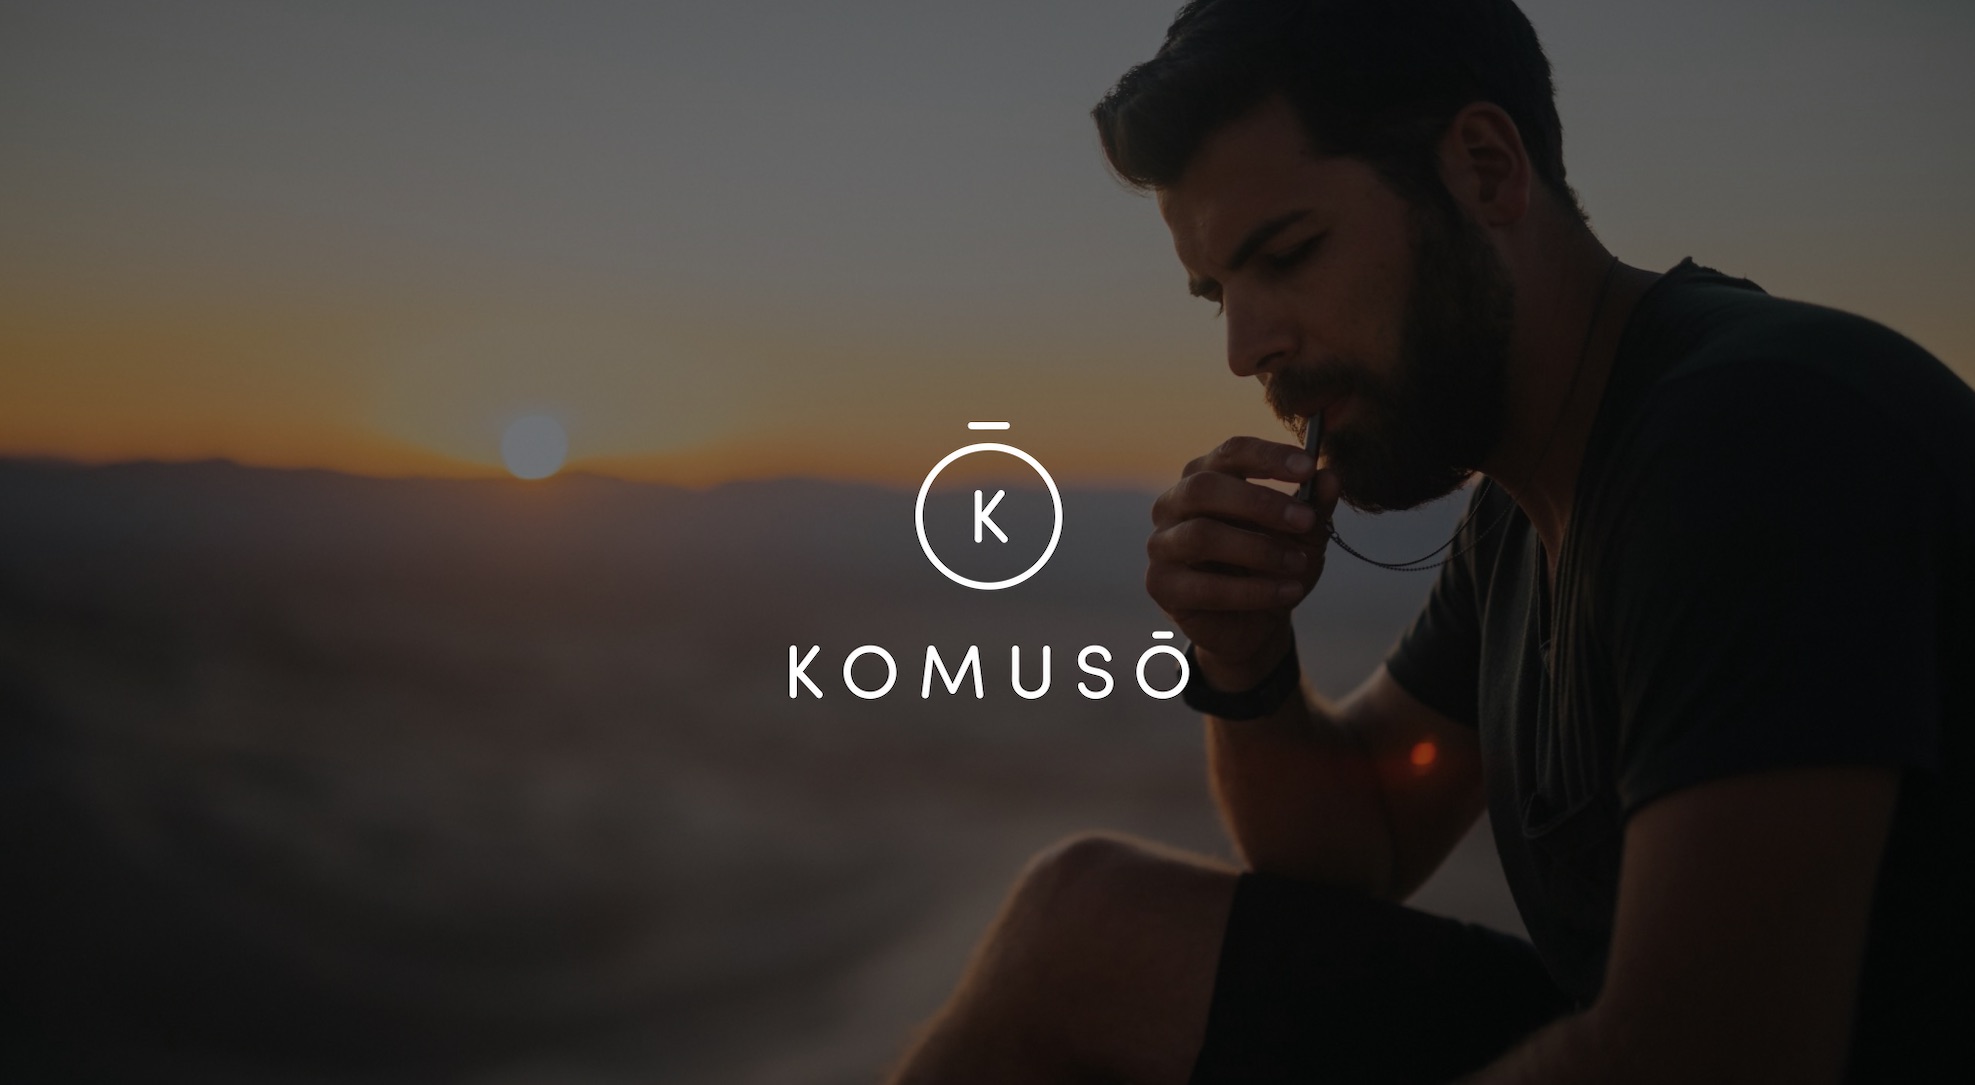 White Komuso logo Photo Services with background of bearded man blowing whistle with sun setting in the distance